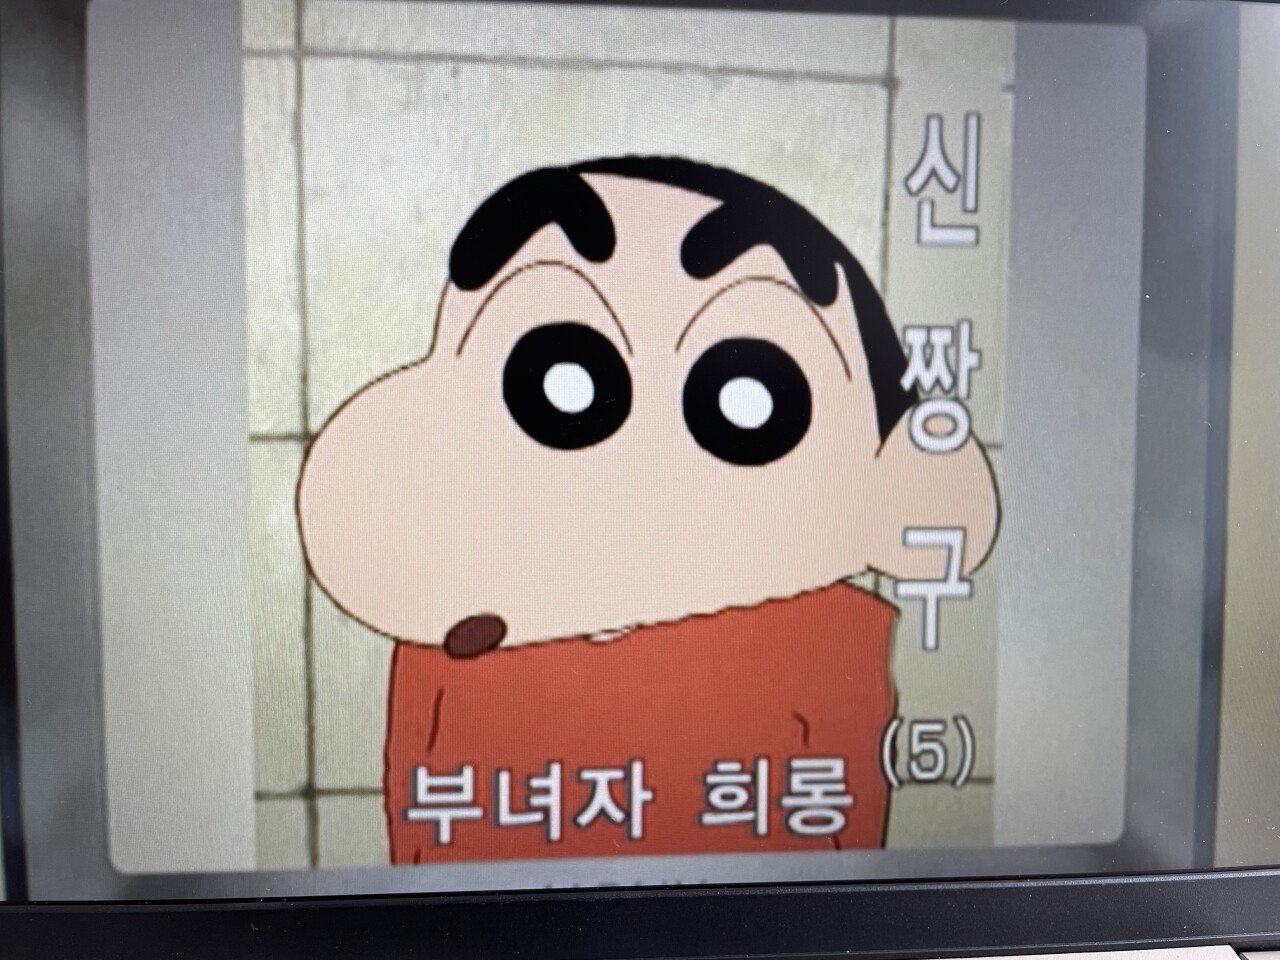 It's been a while since I saw Shin Chan Bulgogi Road, and it's funny